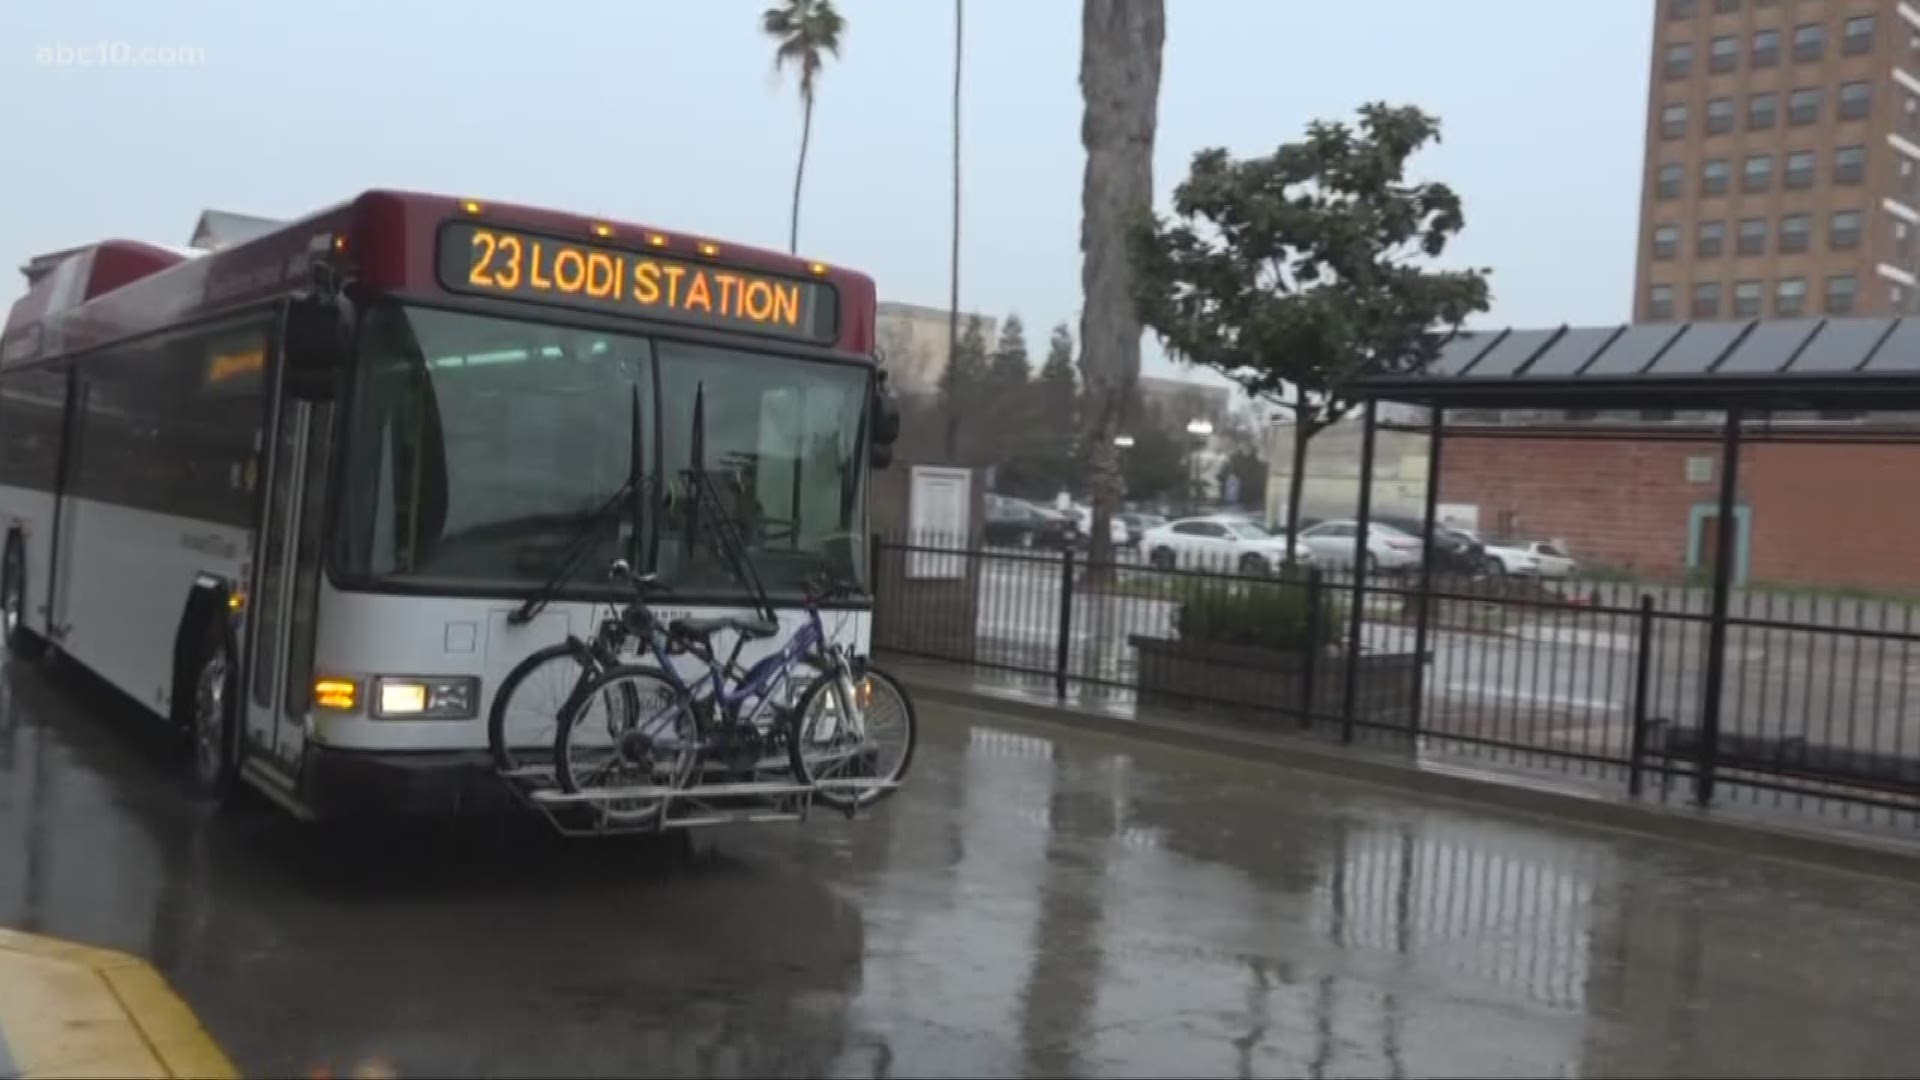 Bus routes from Stockton to Lodi, Tracy, Manteca and Modesto could be eliminated.